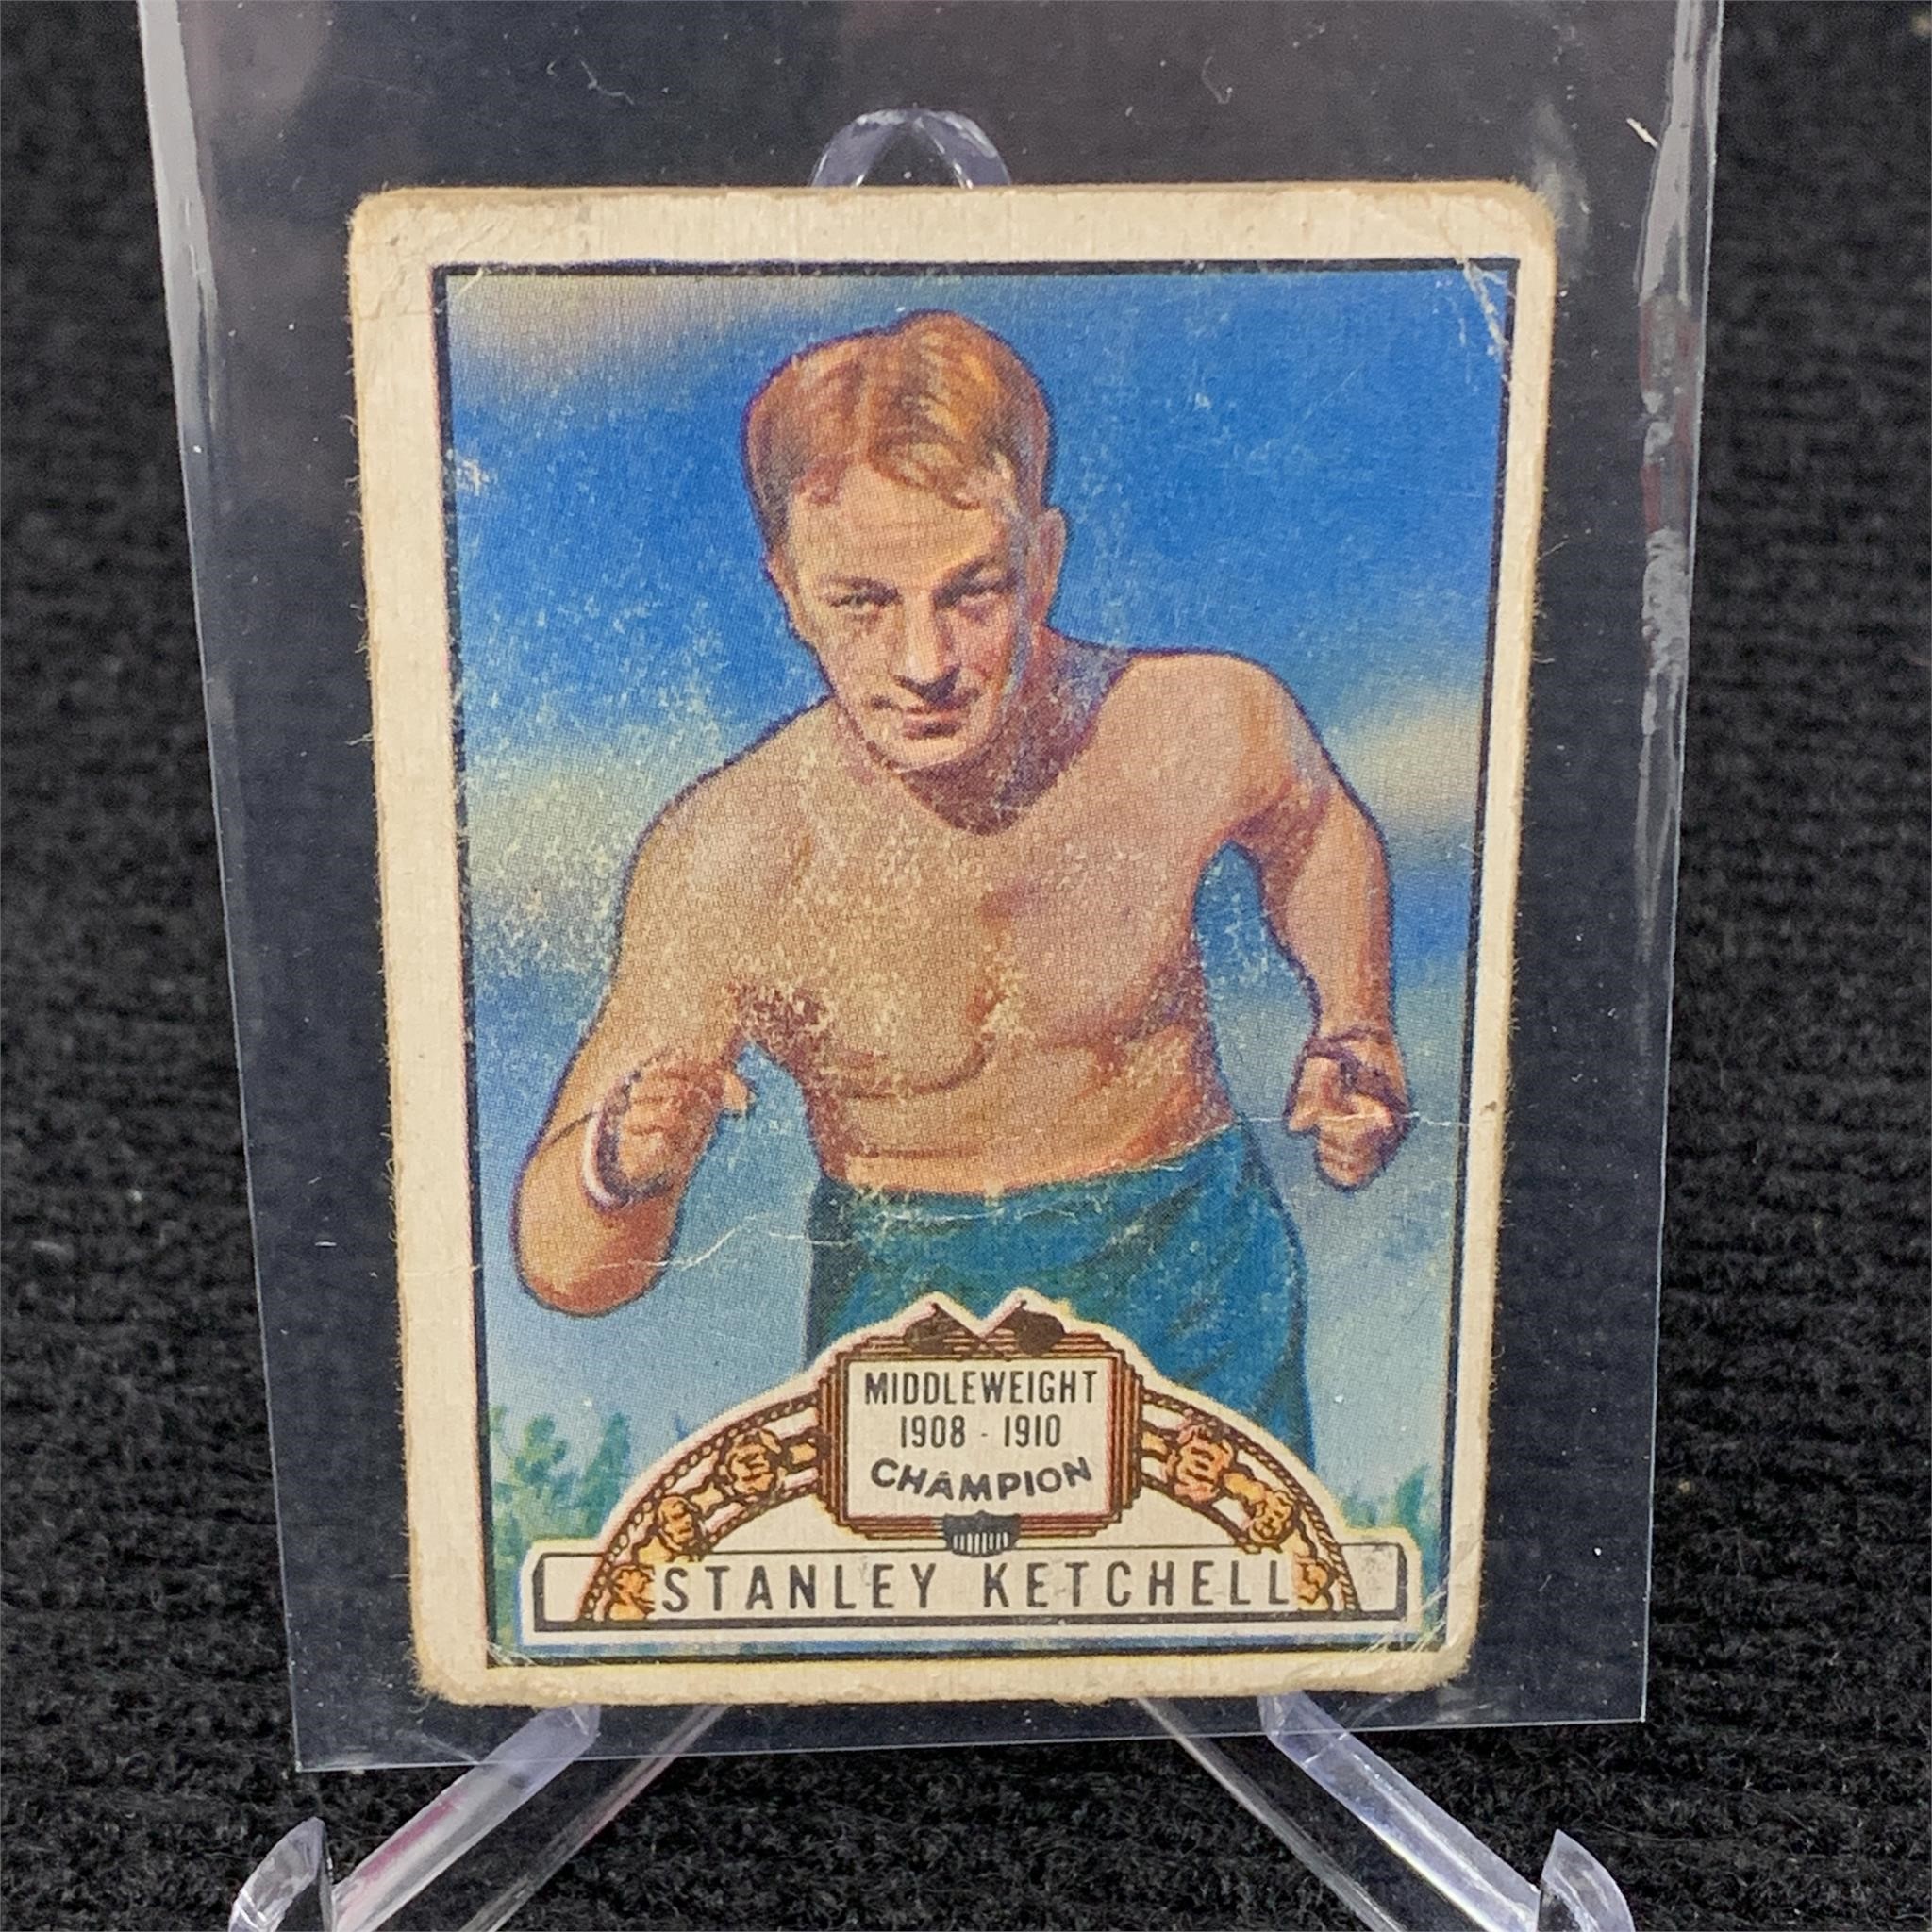 1951 Topps Stanley Ketchel Boxing Card